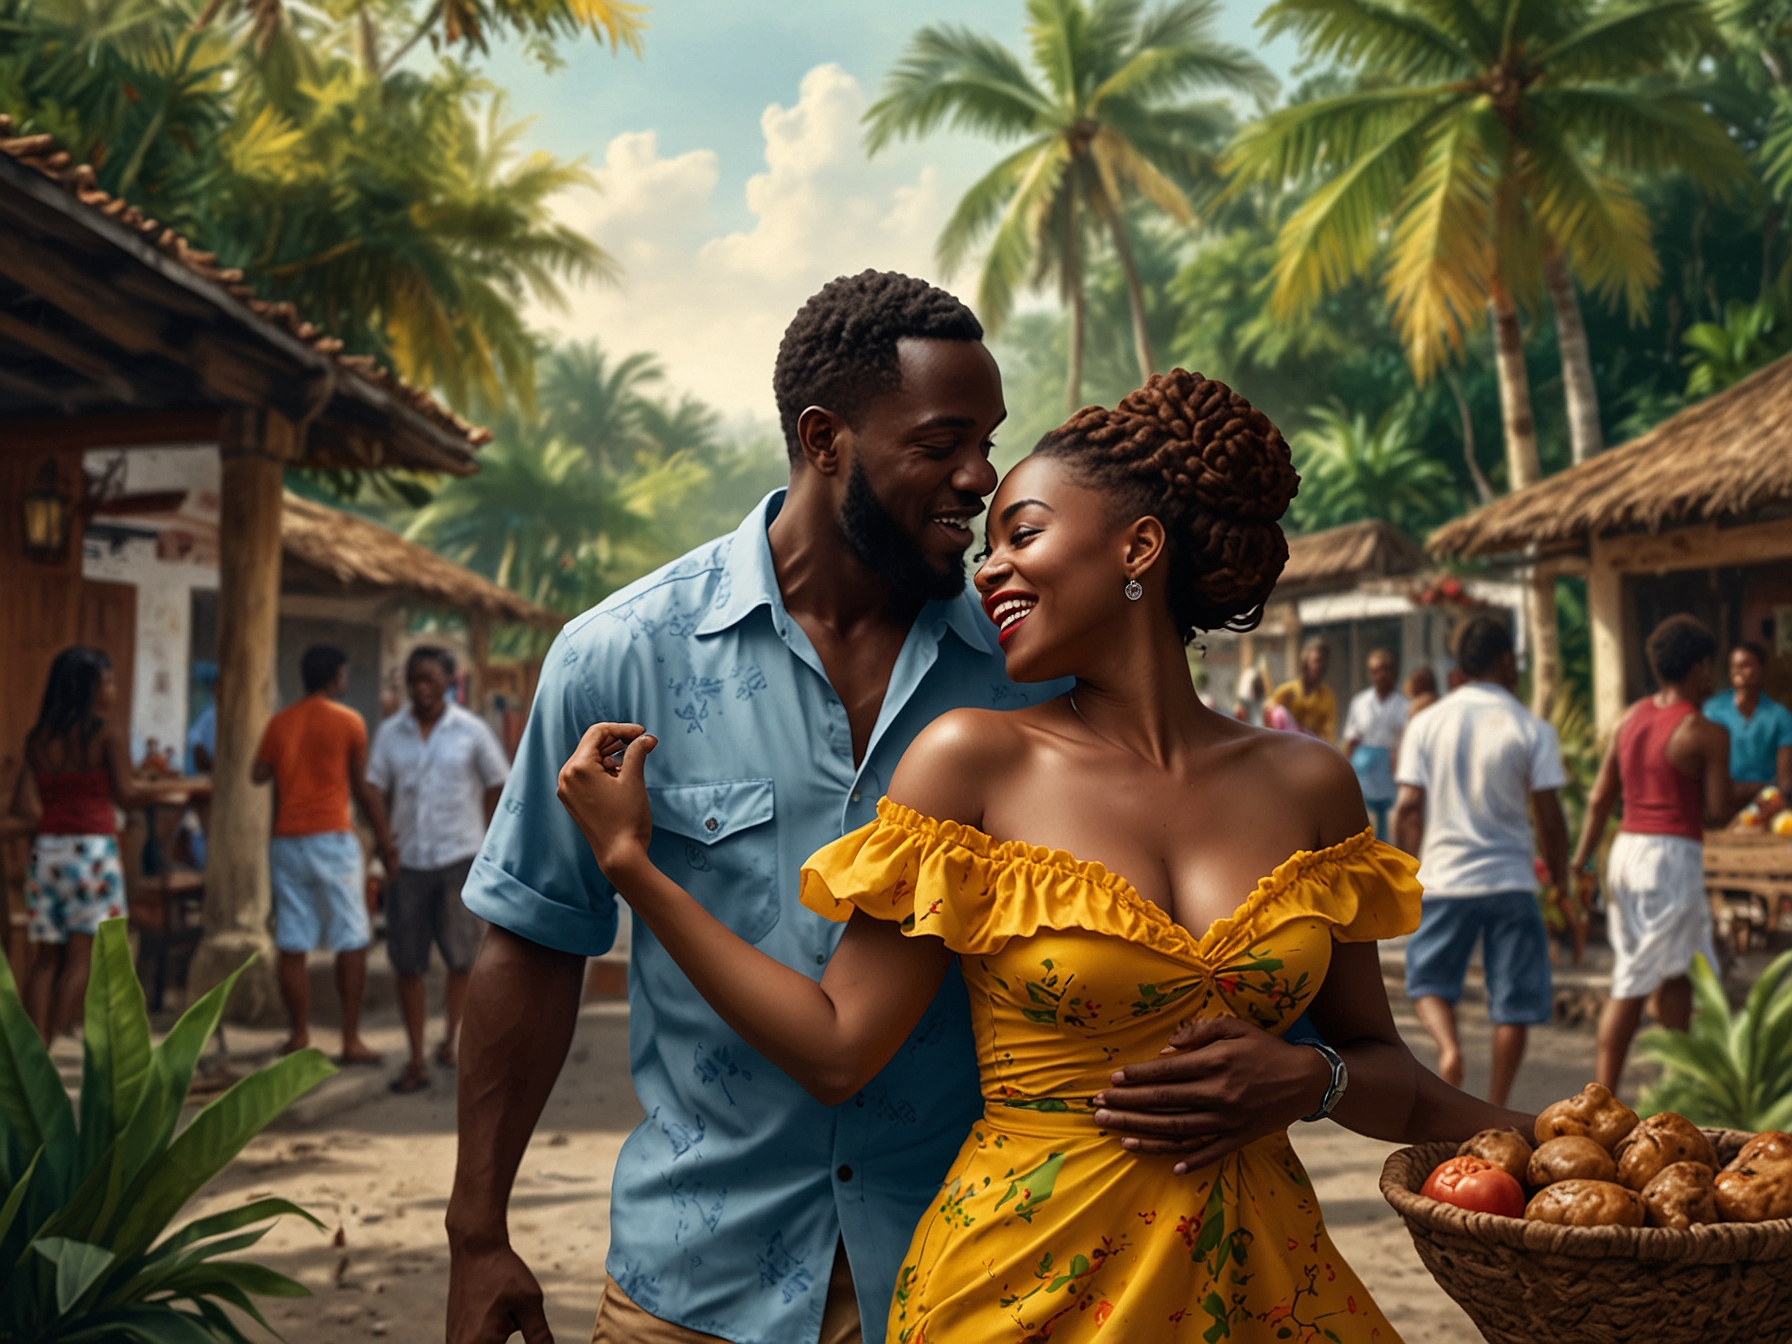 The couple explores the vibrant culture of Jamaica, participating in traditional dance and savoring local cuisine like jerk chicken, as they embrace the rich heritage and enjoy their romantic retreat.